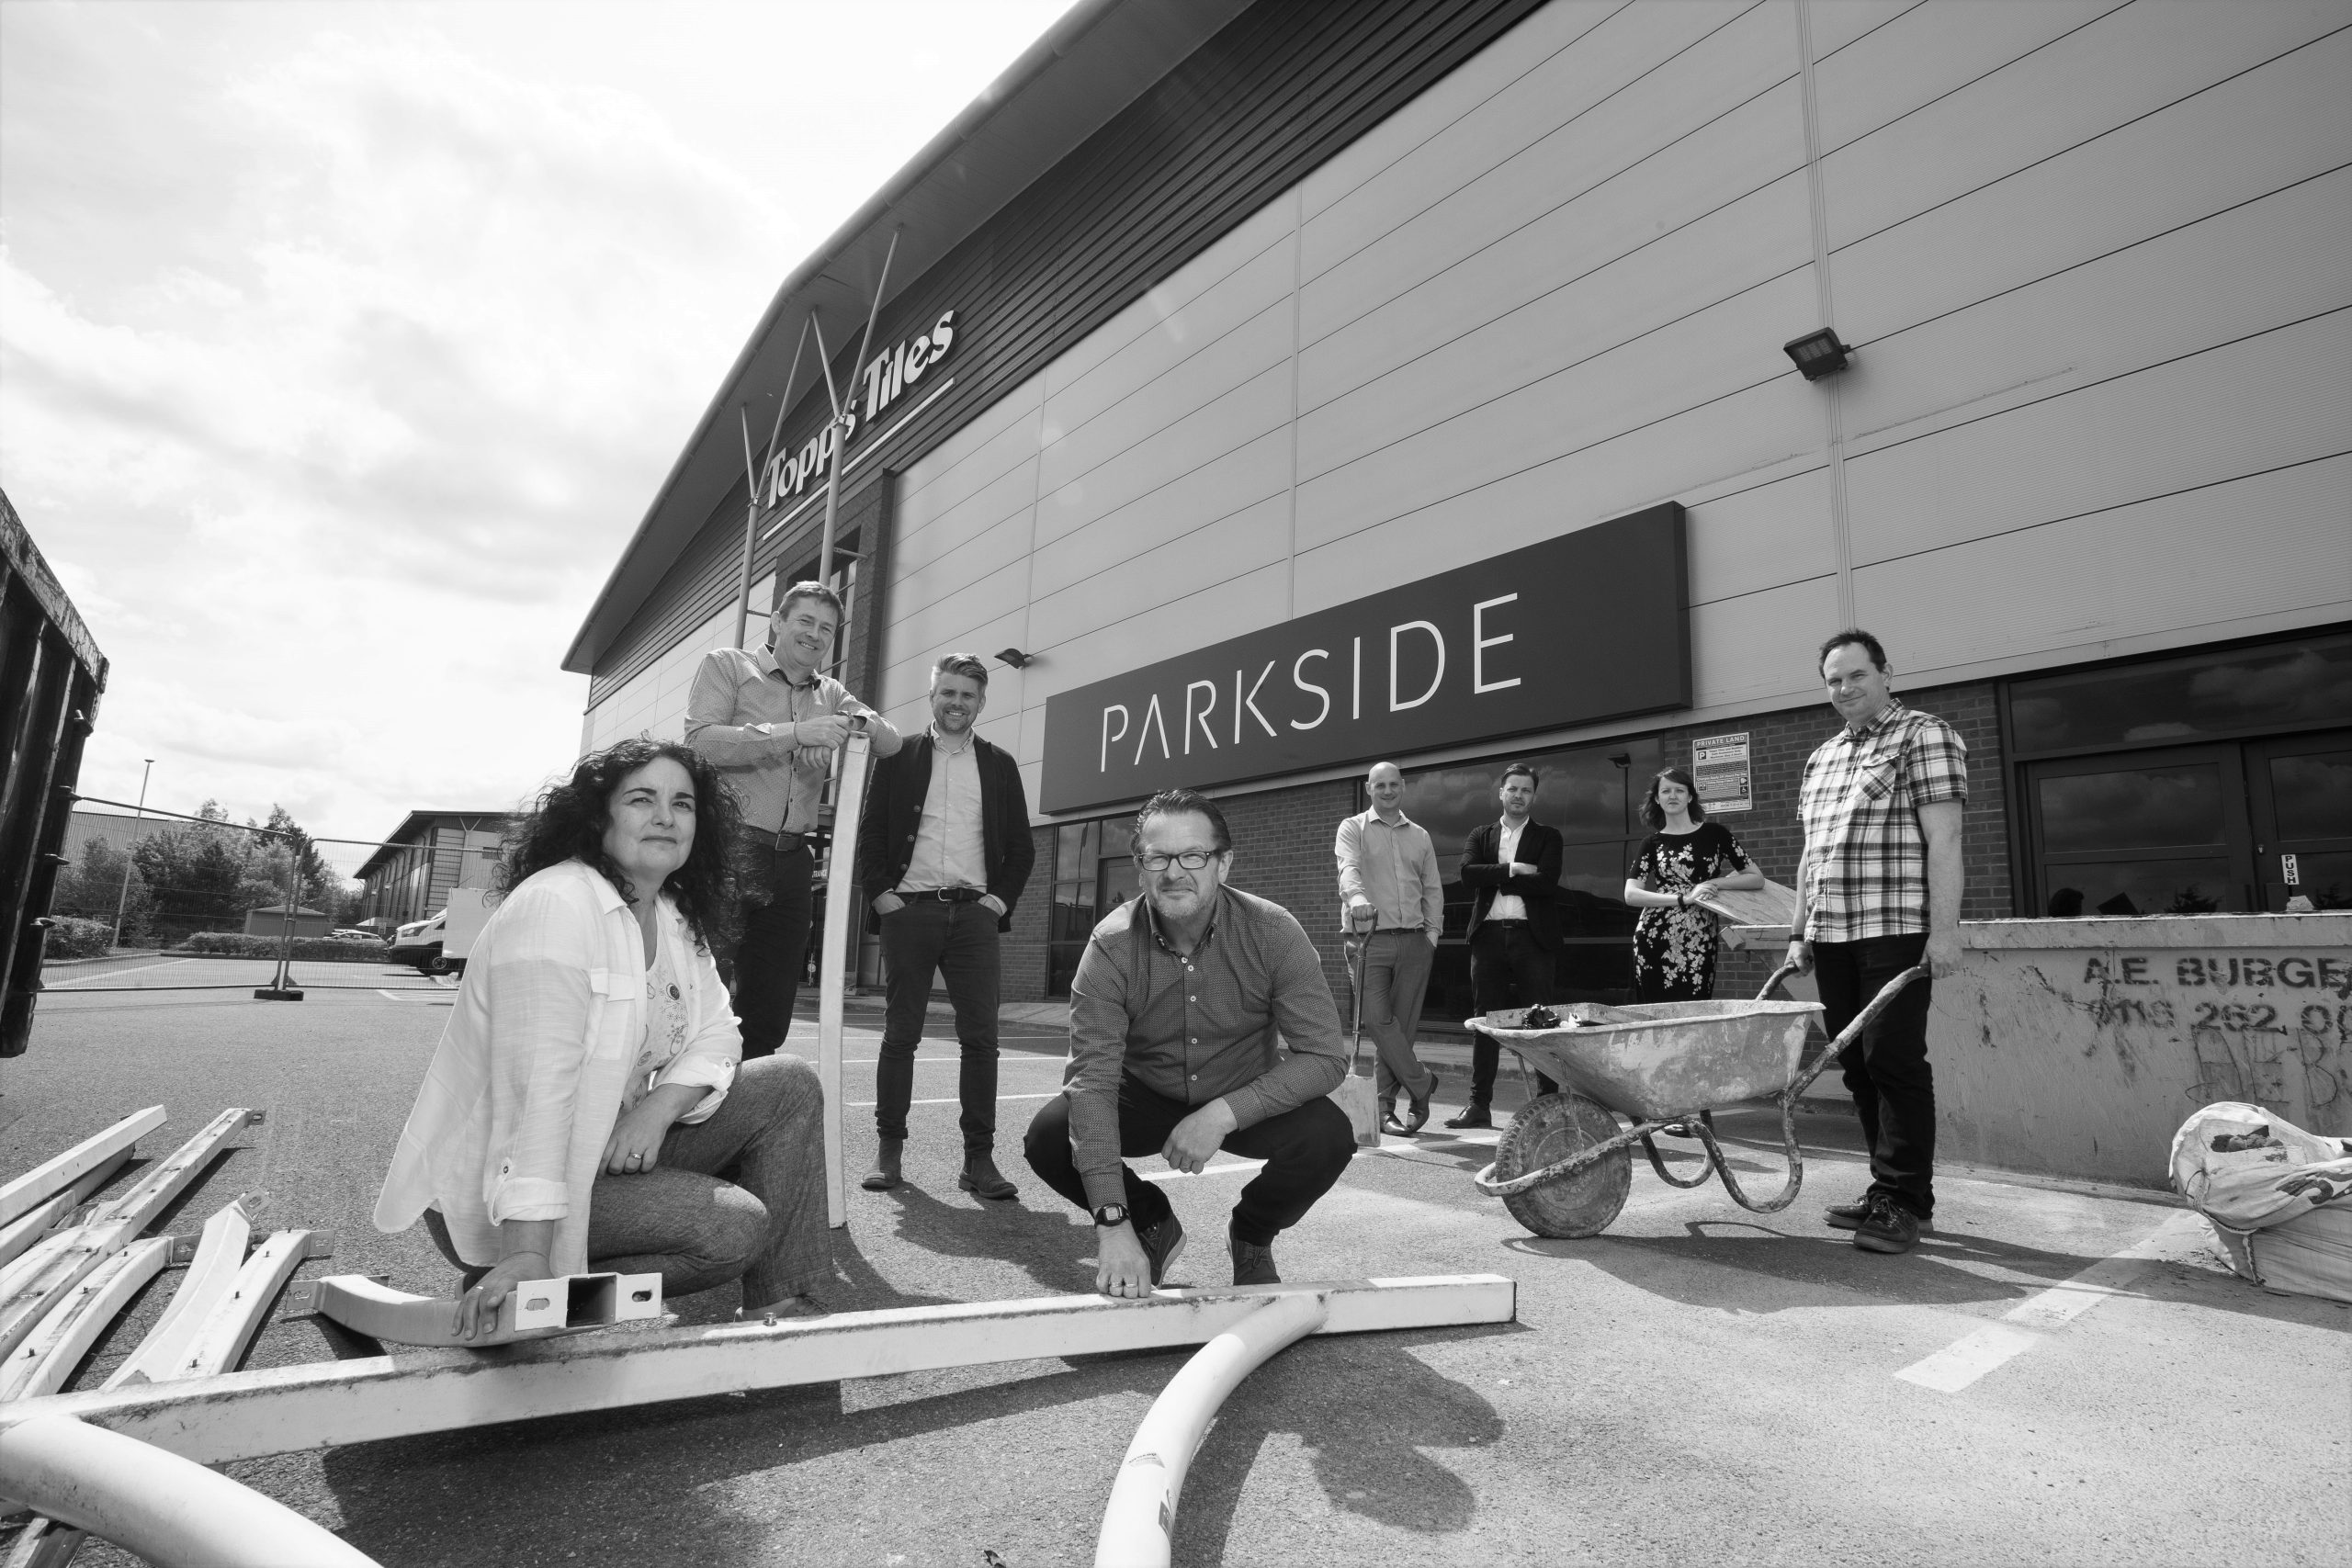 Copyright 2018 Mike Sewell (tel: 07966417114) Photograph by Mikey Sewell. Topps Tiles Parkside team outside their new building on Grove Park in Leicester (Commissioned by Lizz Lee)